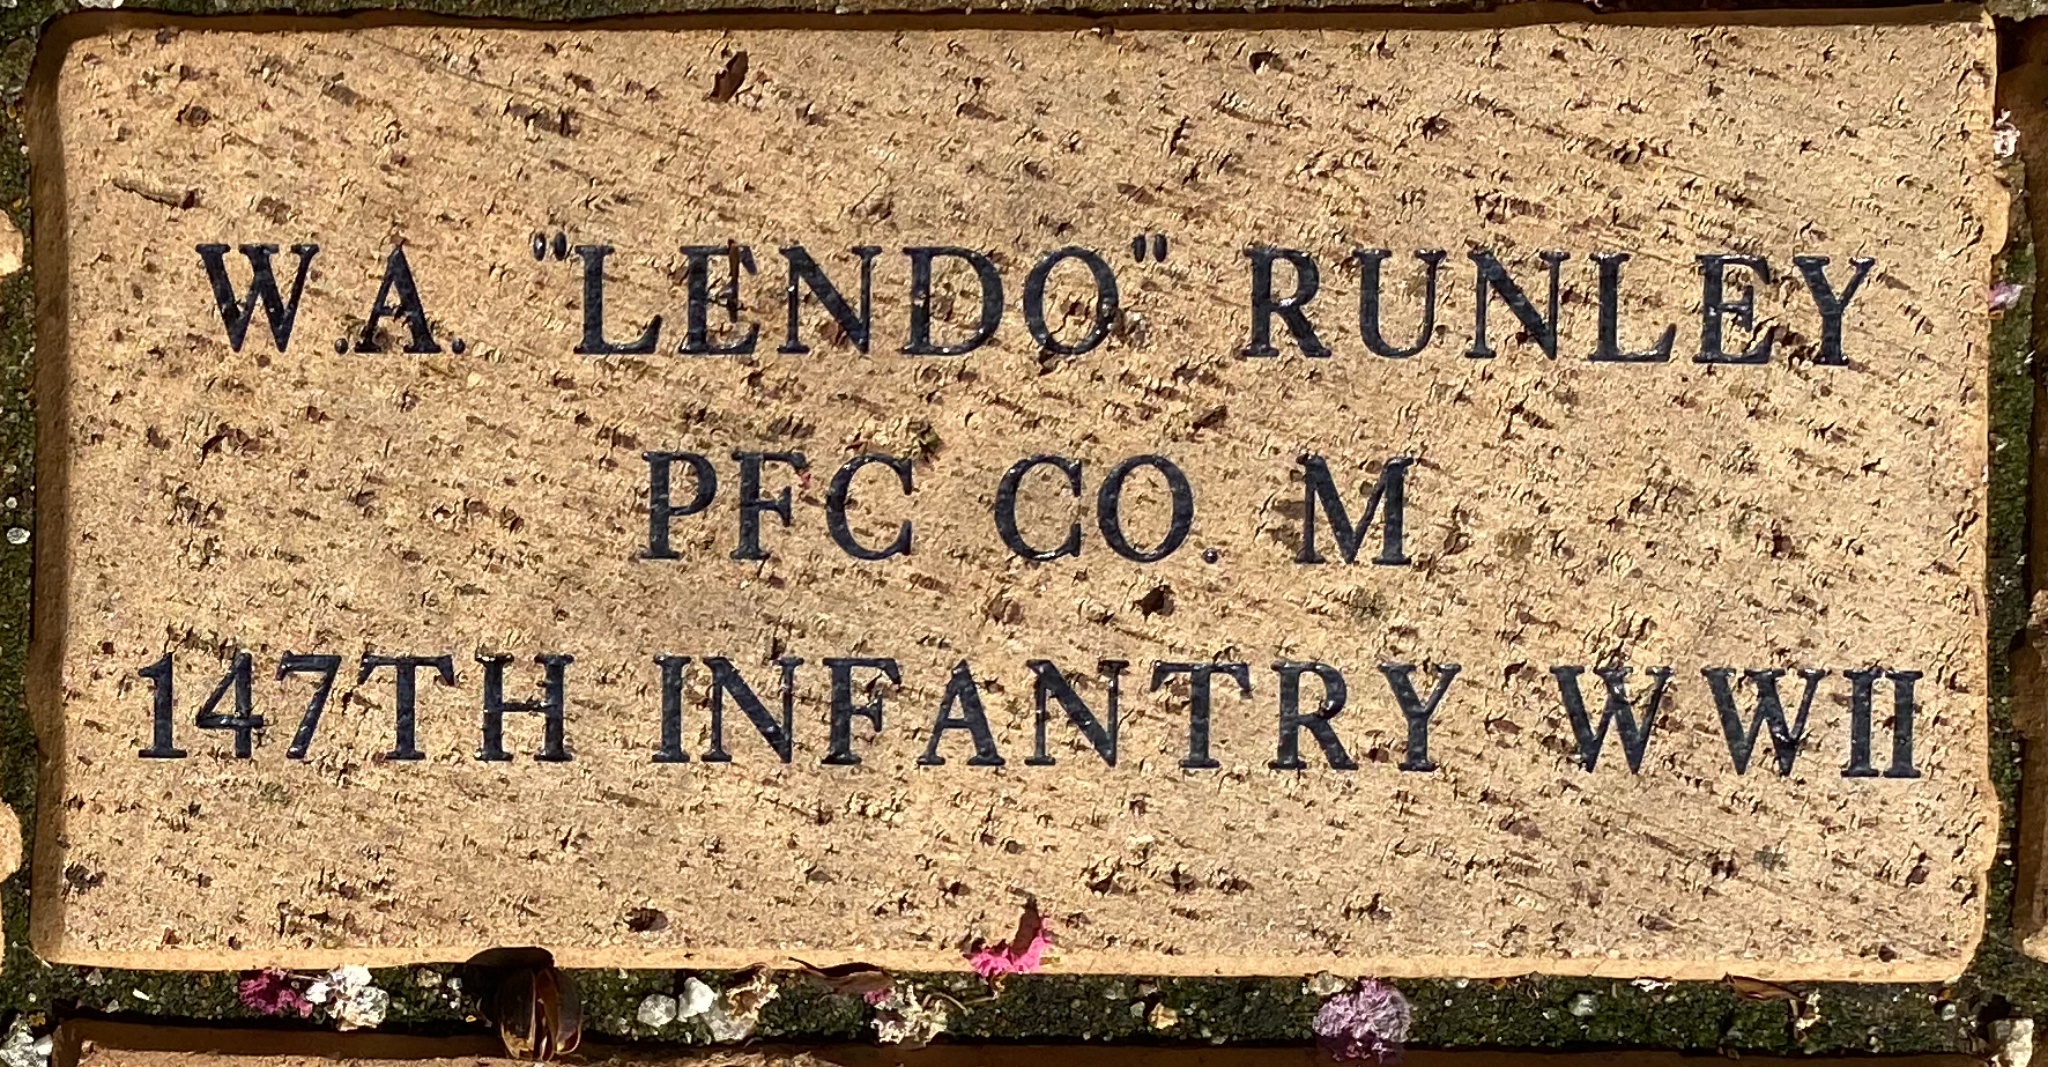 W.A. “LENDO” RUNLEY PFC CO. M 147TH INFANTRY WWII